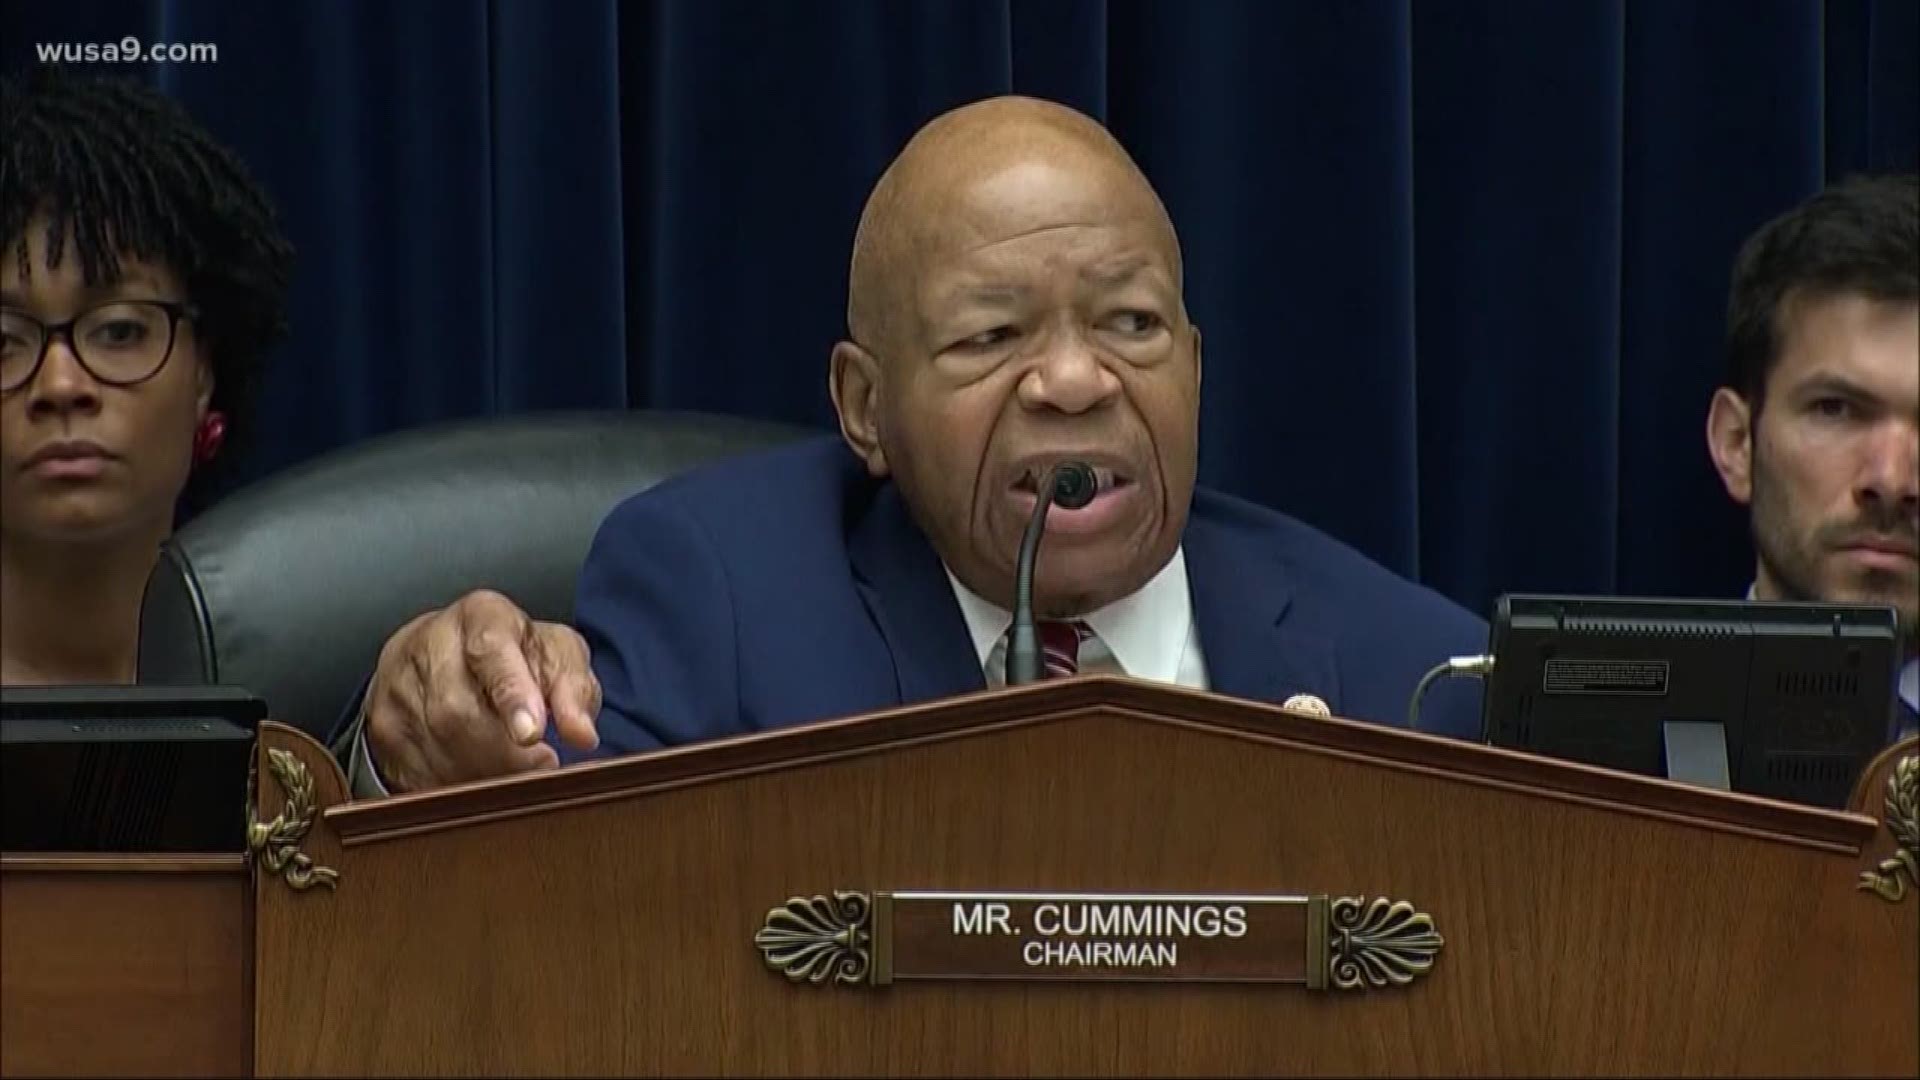 Congressman Cummings passed away at Johns Hopkins hospital due to complications concerning longstanding health challenges.